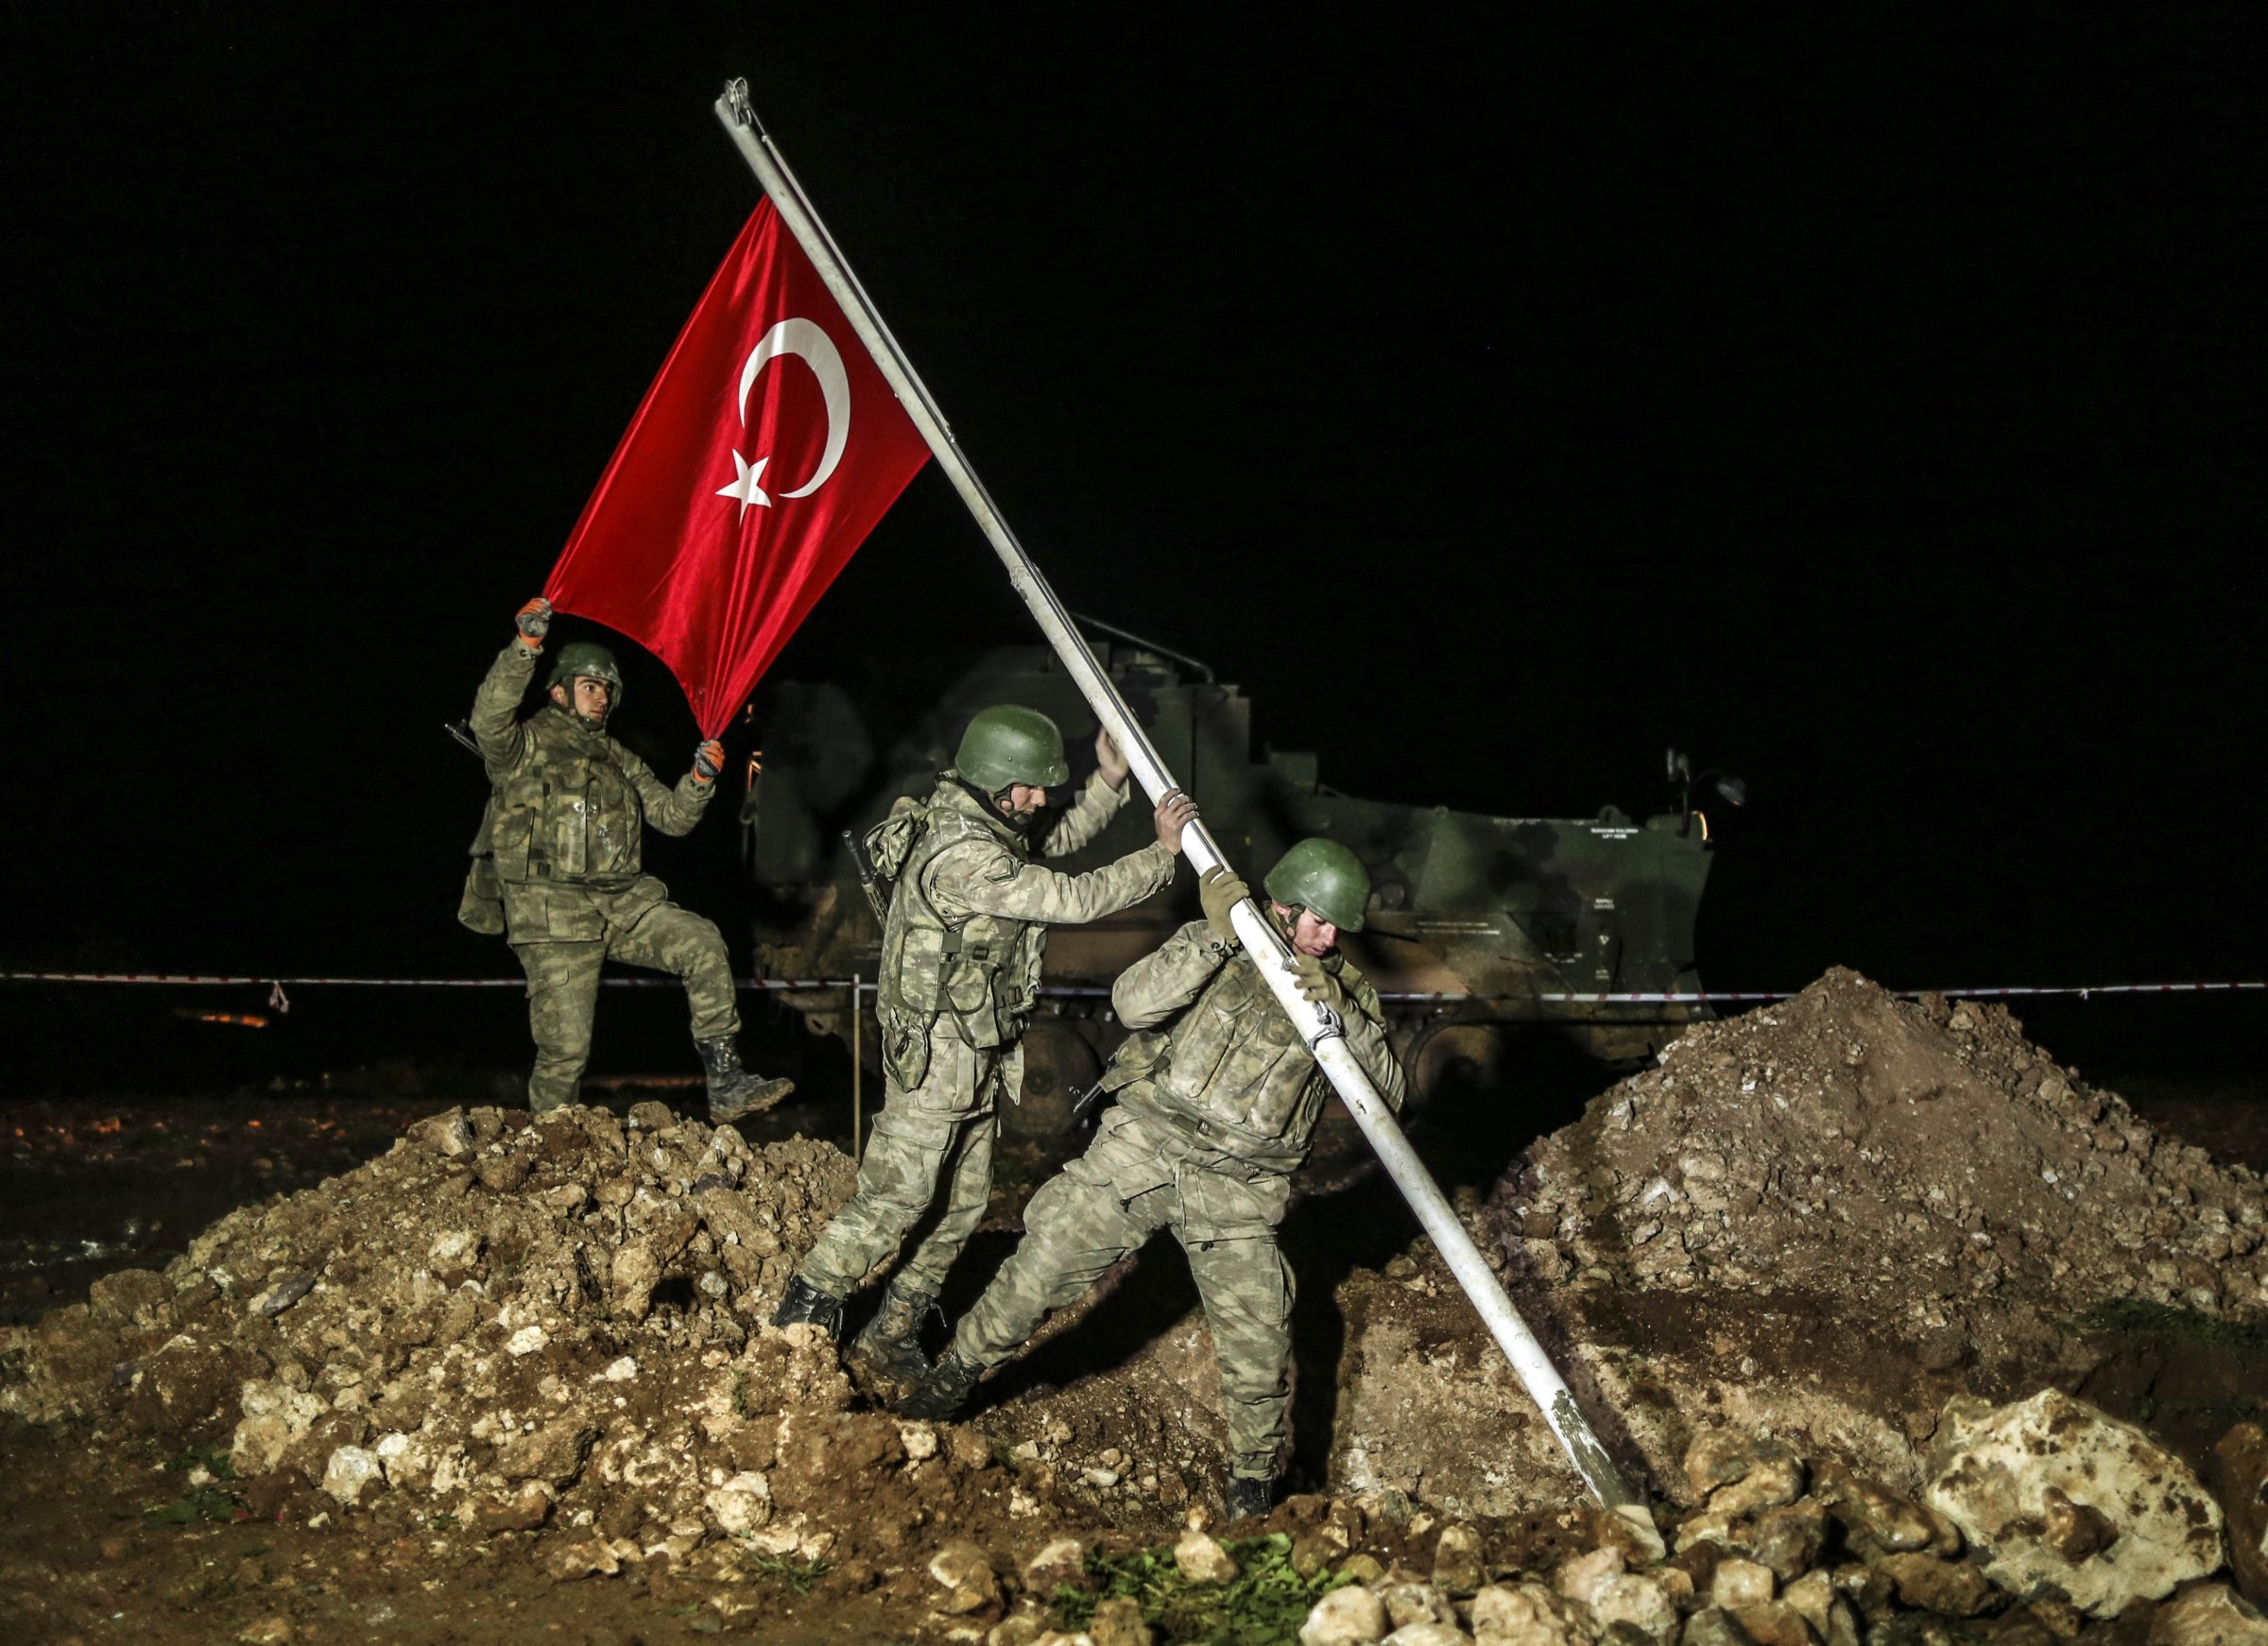 Turkish soldiers put a wire fence around area after Turkish flag is raised on Feb. 22, 2015 in the Esme region of Aleppo where the Tomb of Suleyman Shah will be placed.